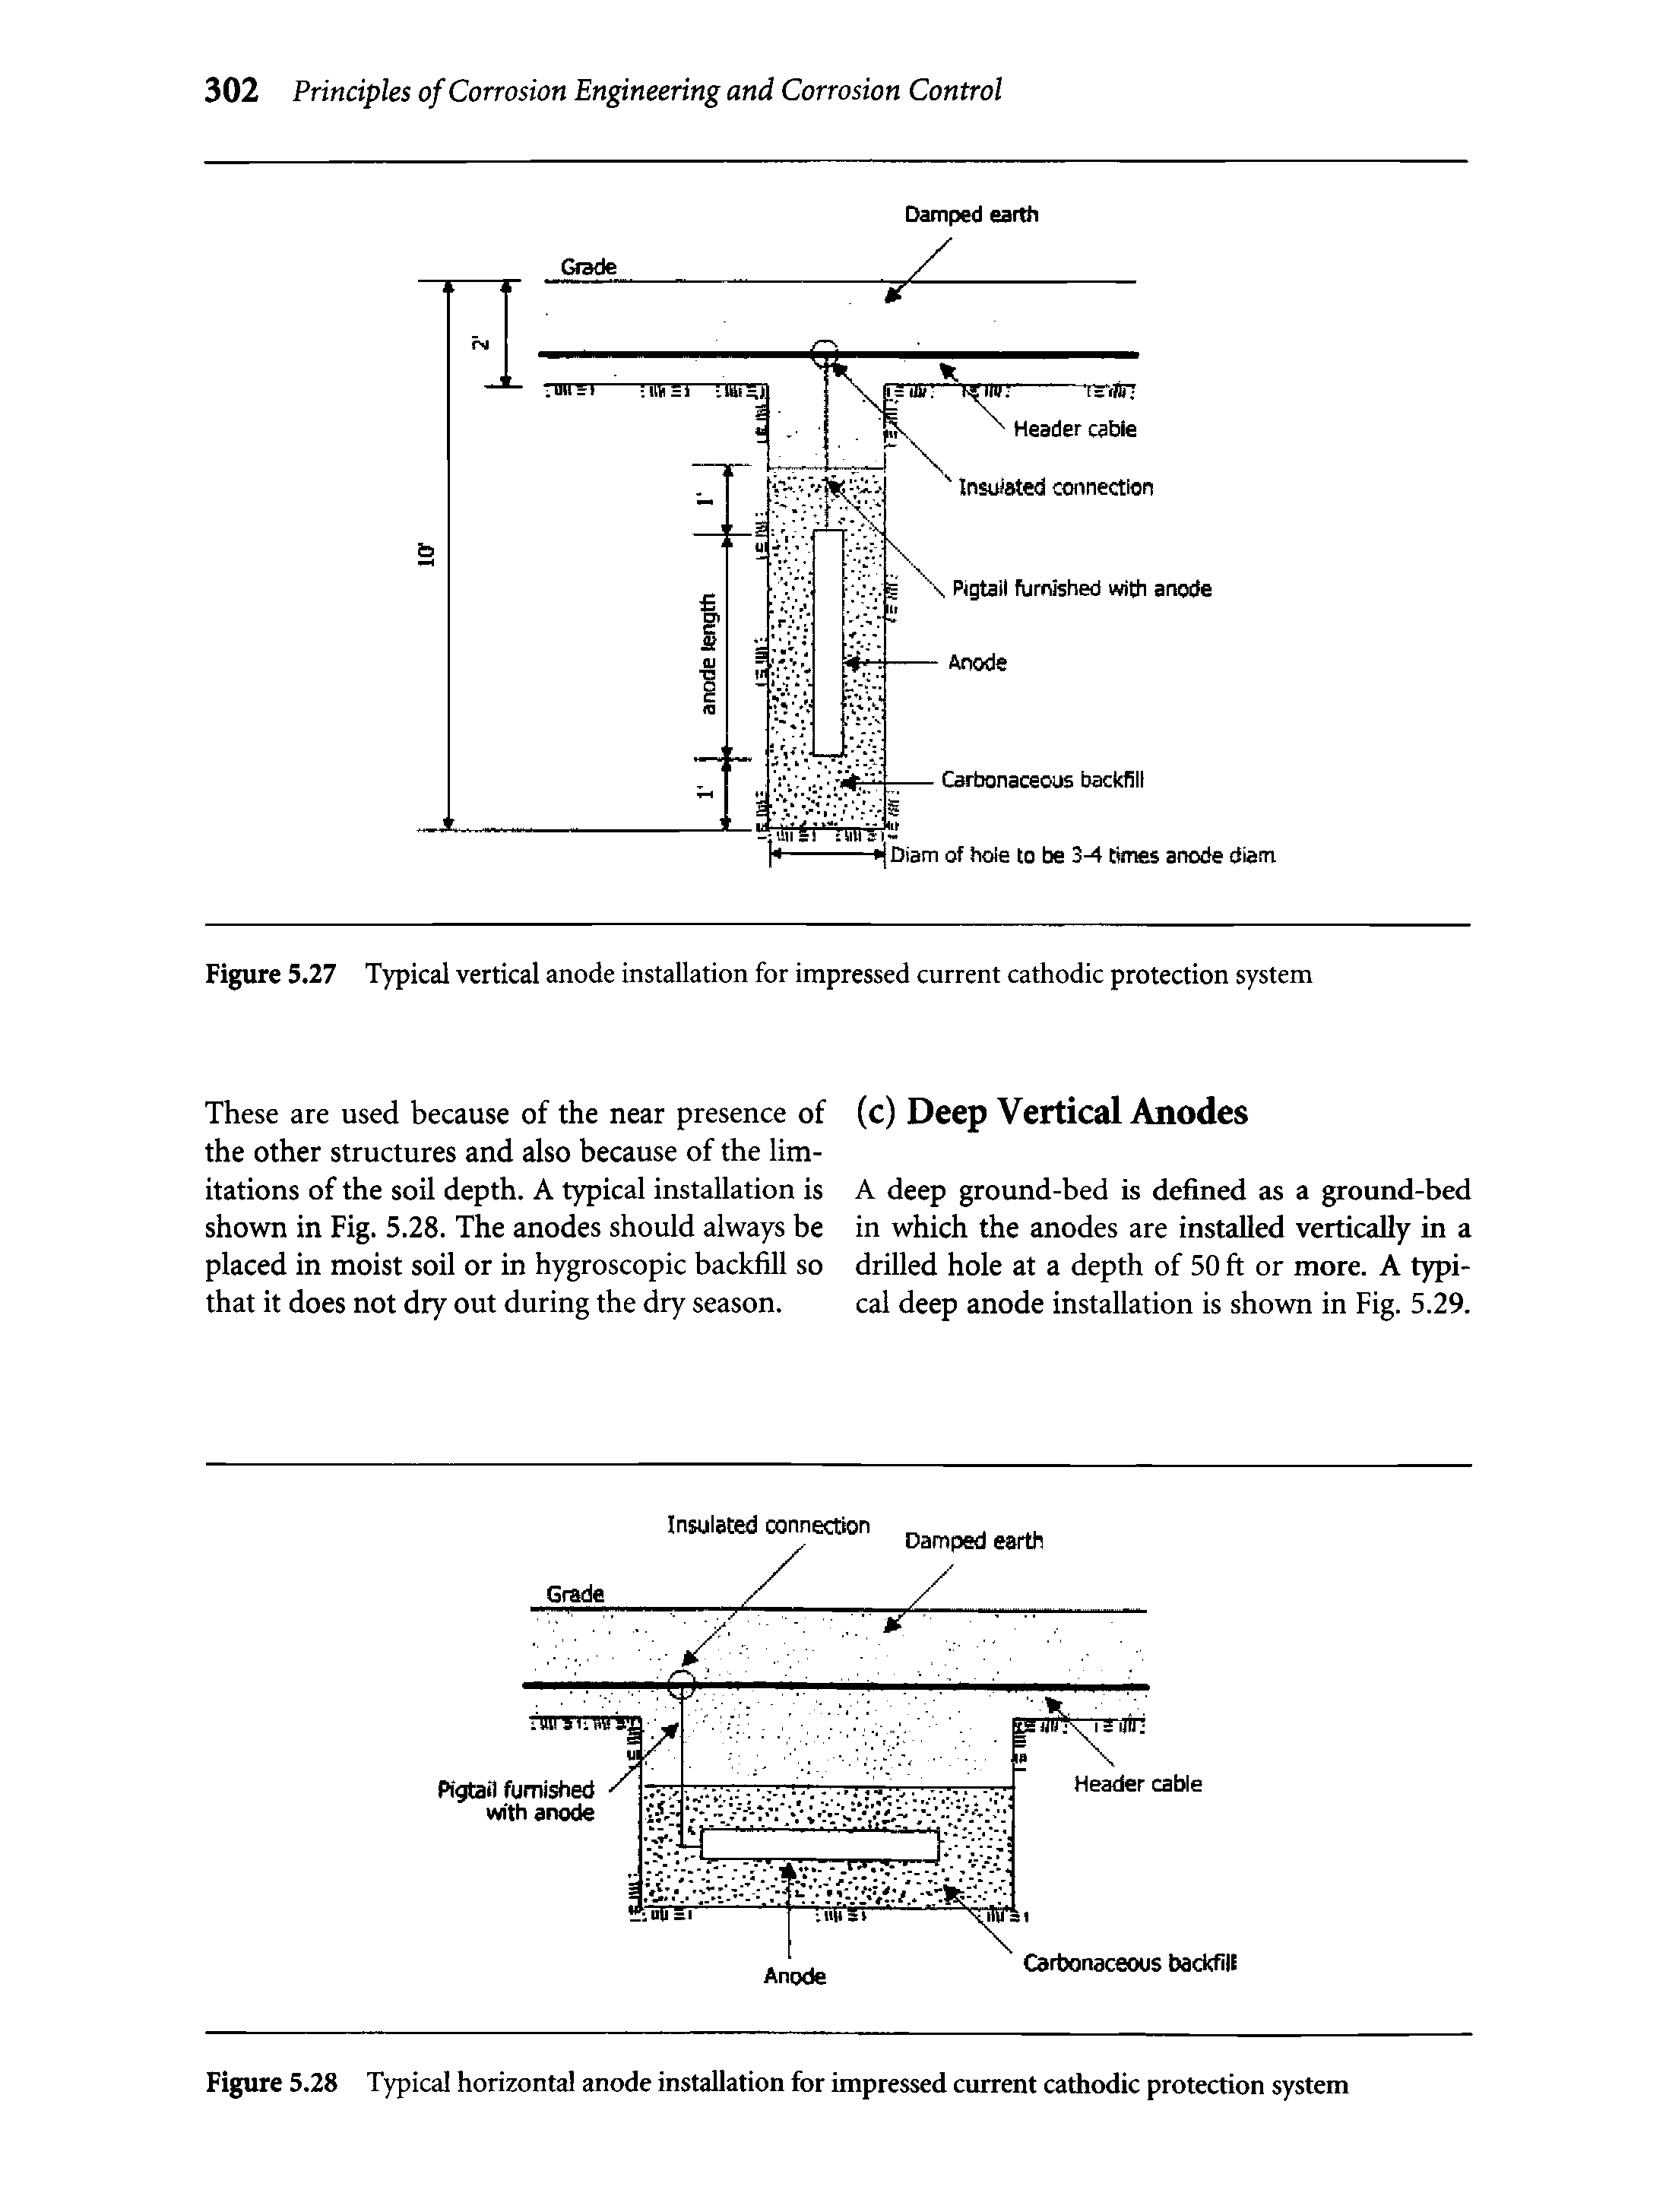 Figure 5.28 Typical horizontal anode installation for impressed current cathodic protection system...